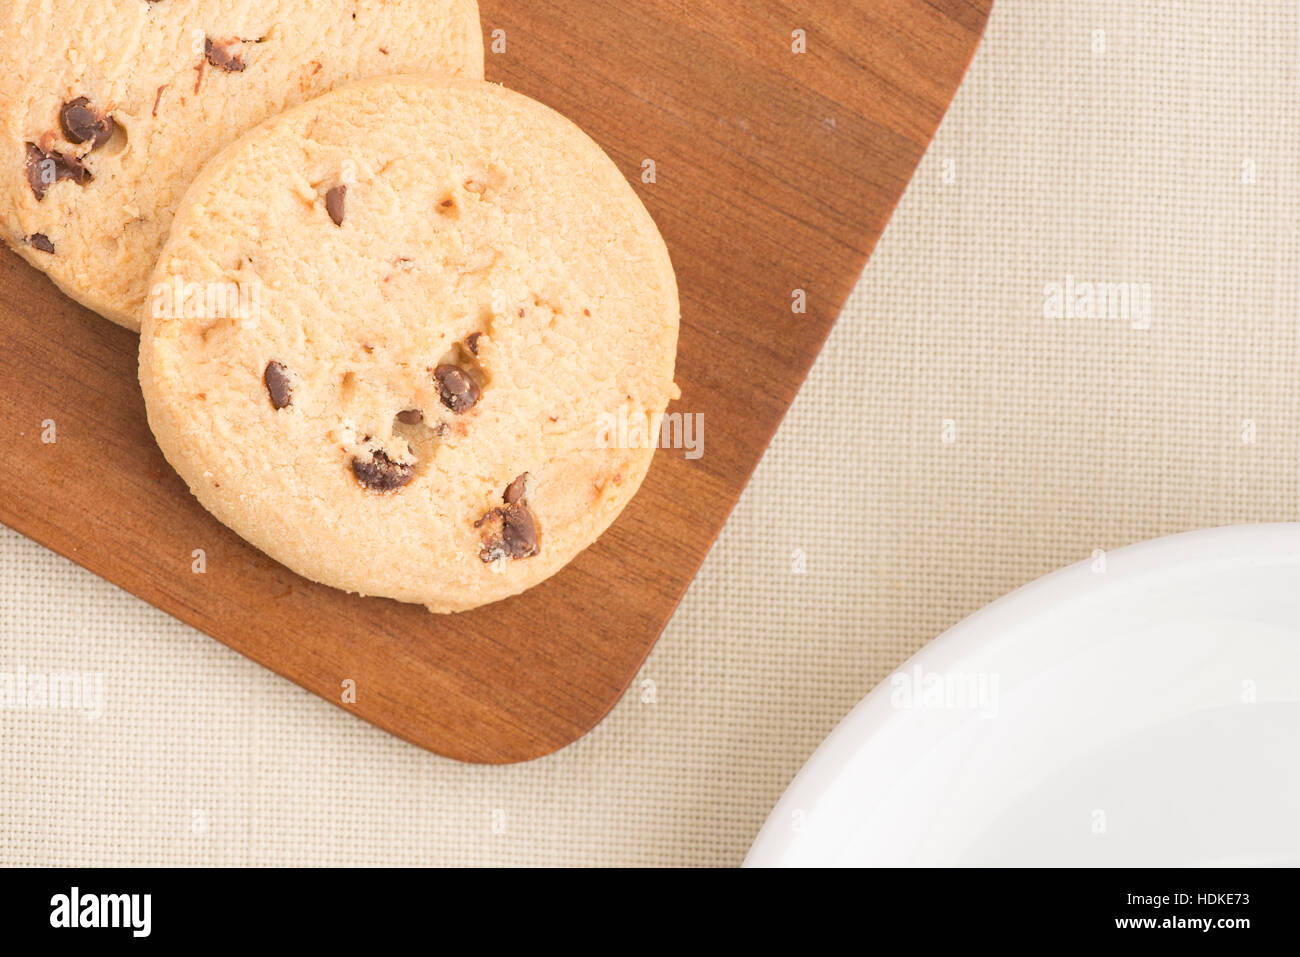 Chocolate chip cookies on wooden cutting board from above in close up. Sweet food, dessert or snack. The cookies are served on a kitchen table. Stock Photo